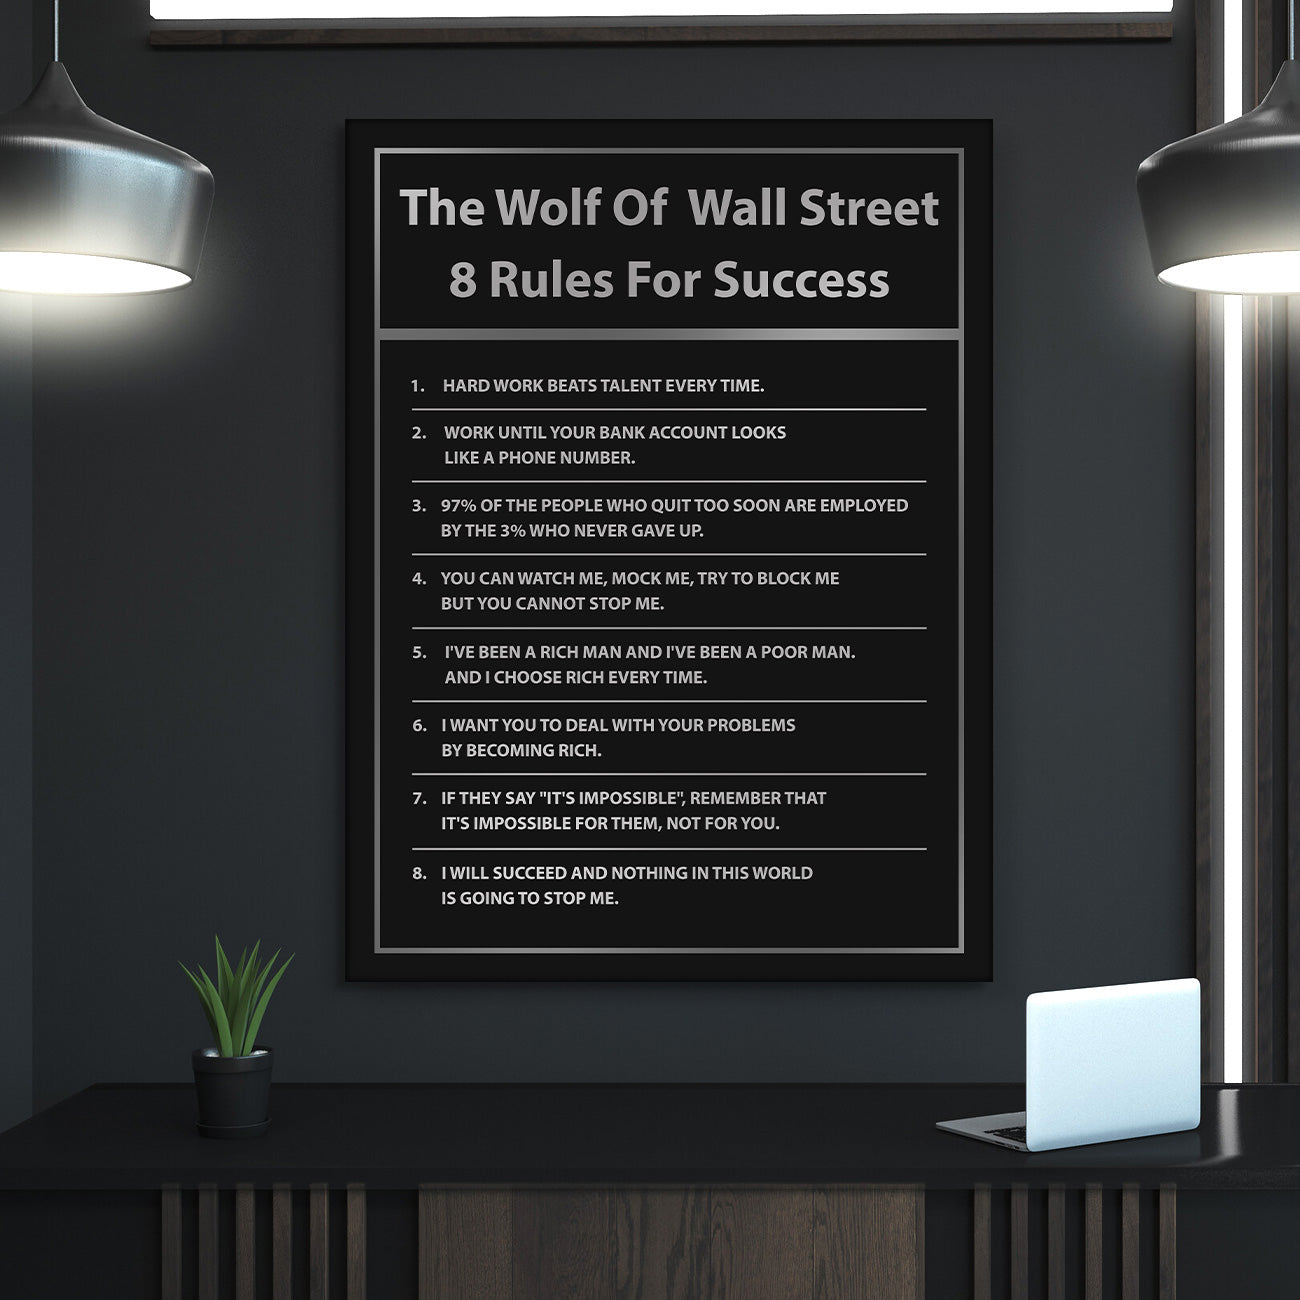 The Wolf Of Wall Street Rules For Success - Success Hunters Prints